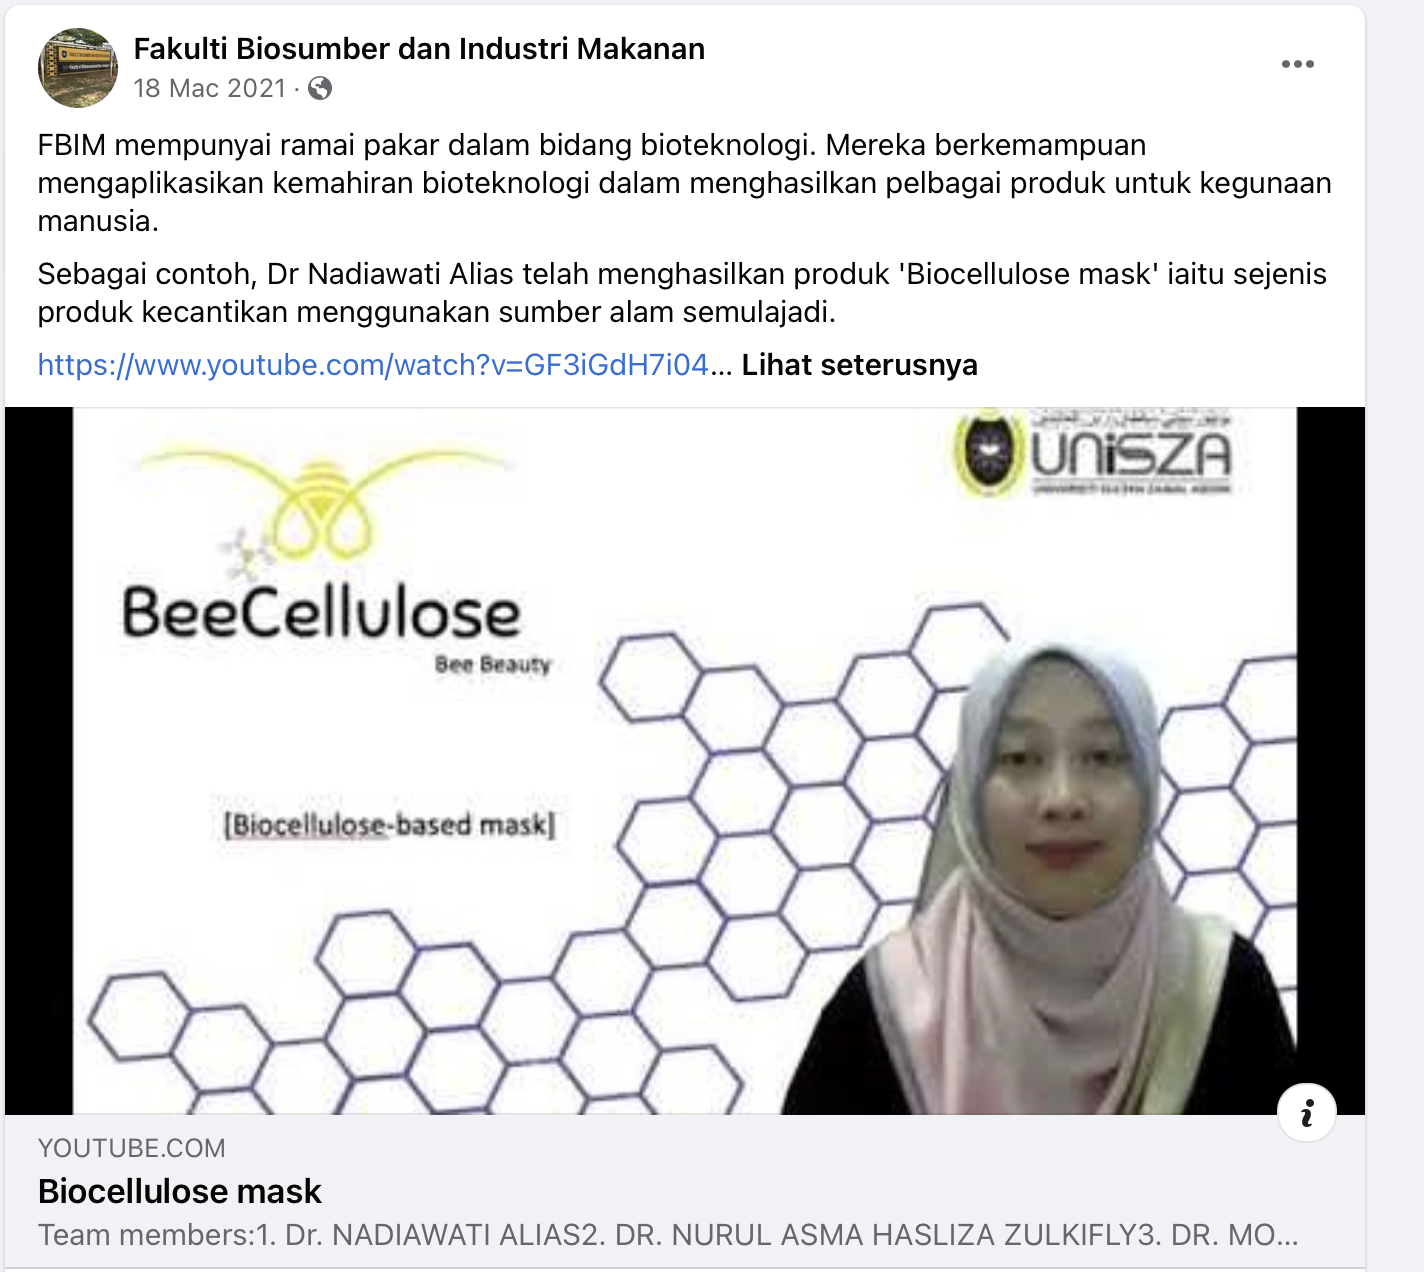 E-SHARING_BEECELLULOSE MASK